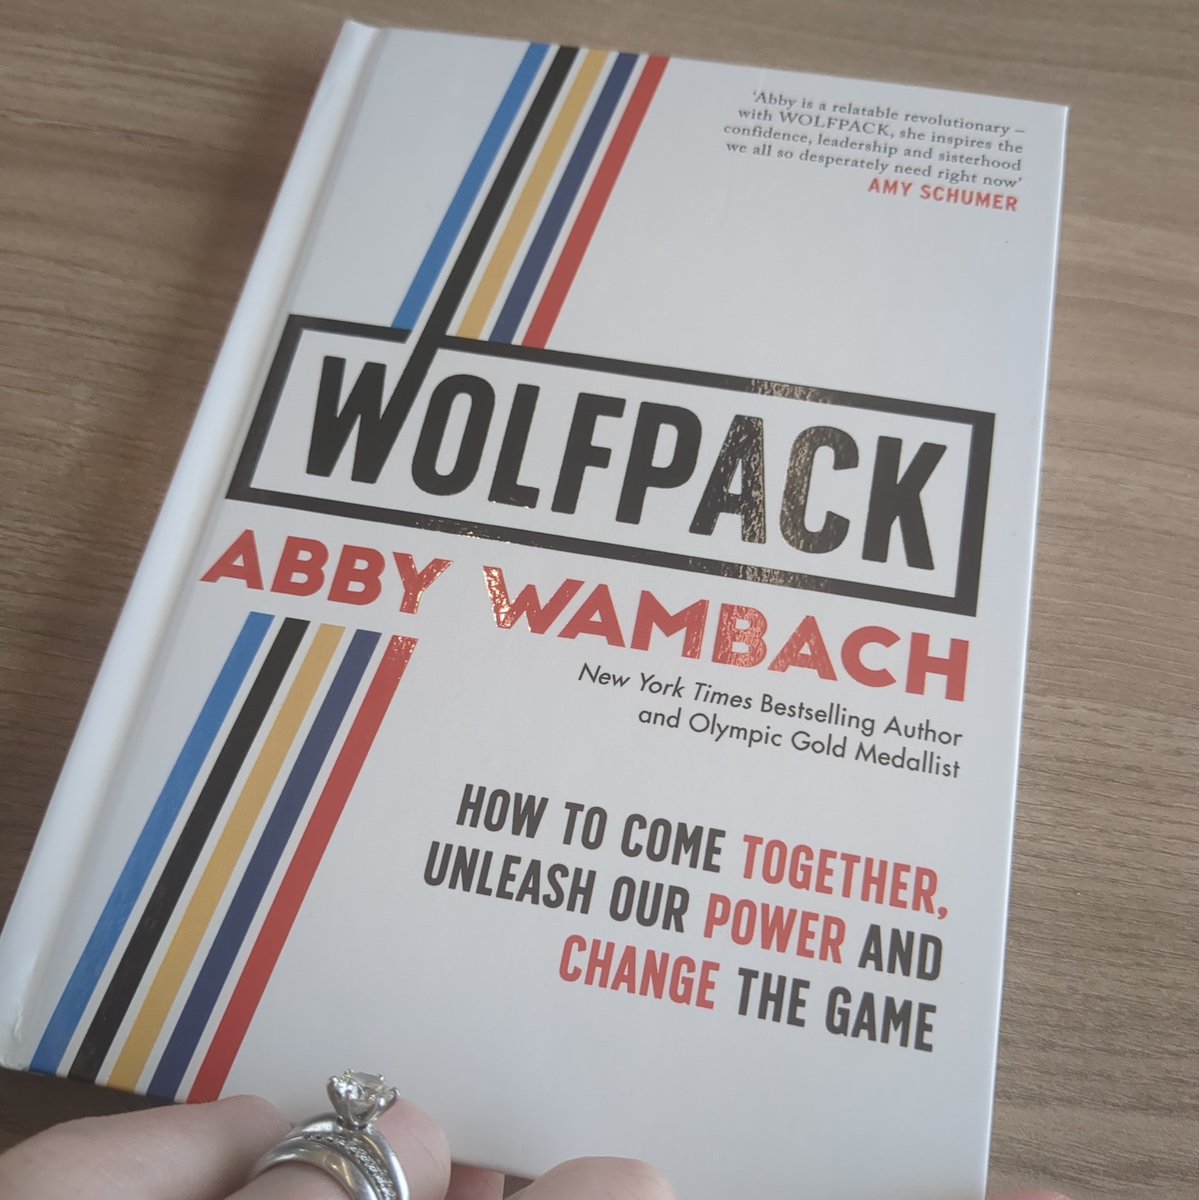 A great little read by @AbbyWambach . @kate84boyle @lanaohara81 made me think of you ladies, along with many other fab females I have the joy to work with. If you've not read it, I think you'd enjoy it! #wolfpack